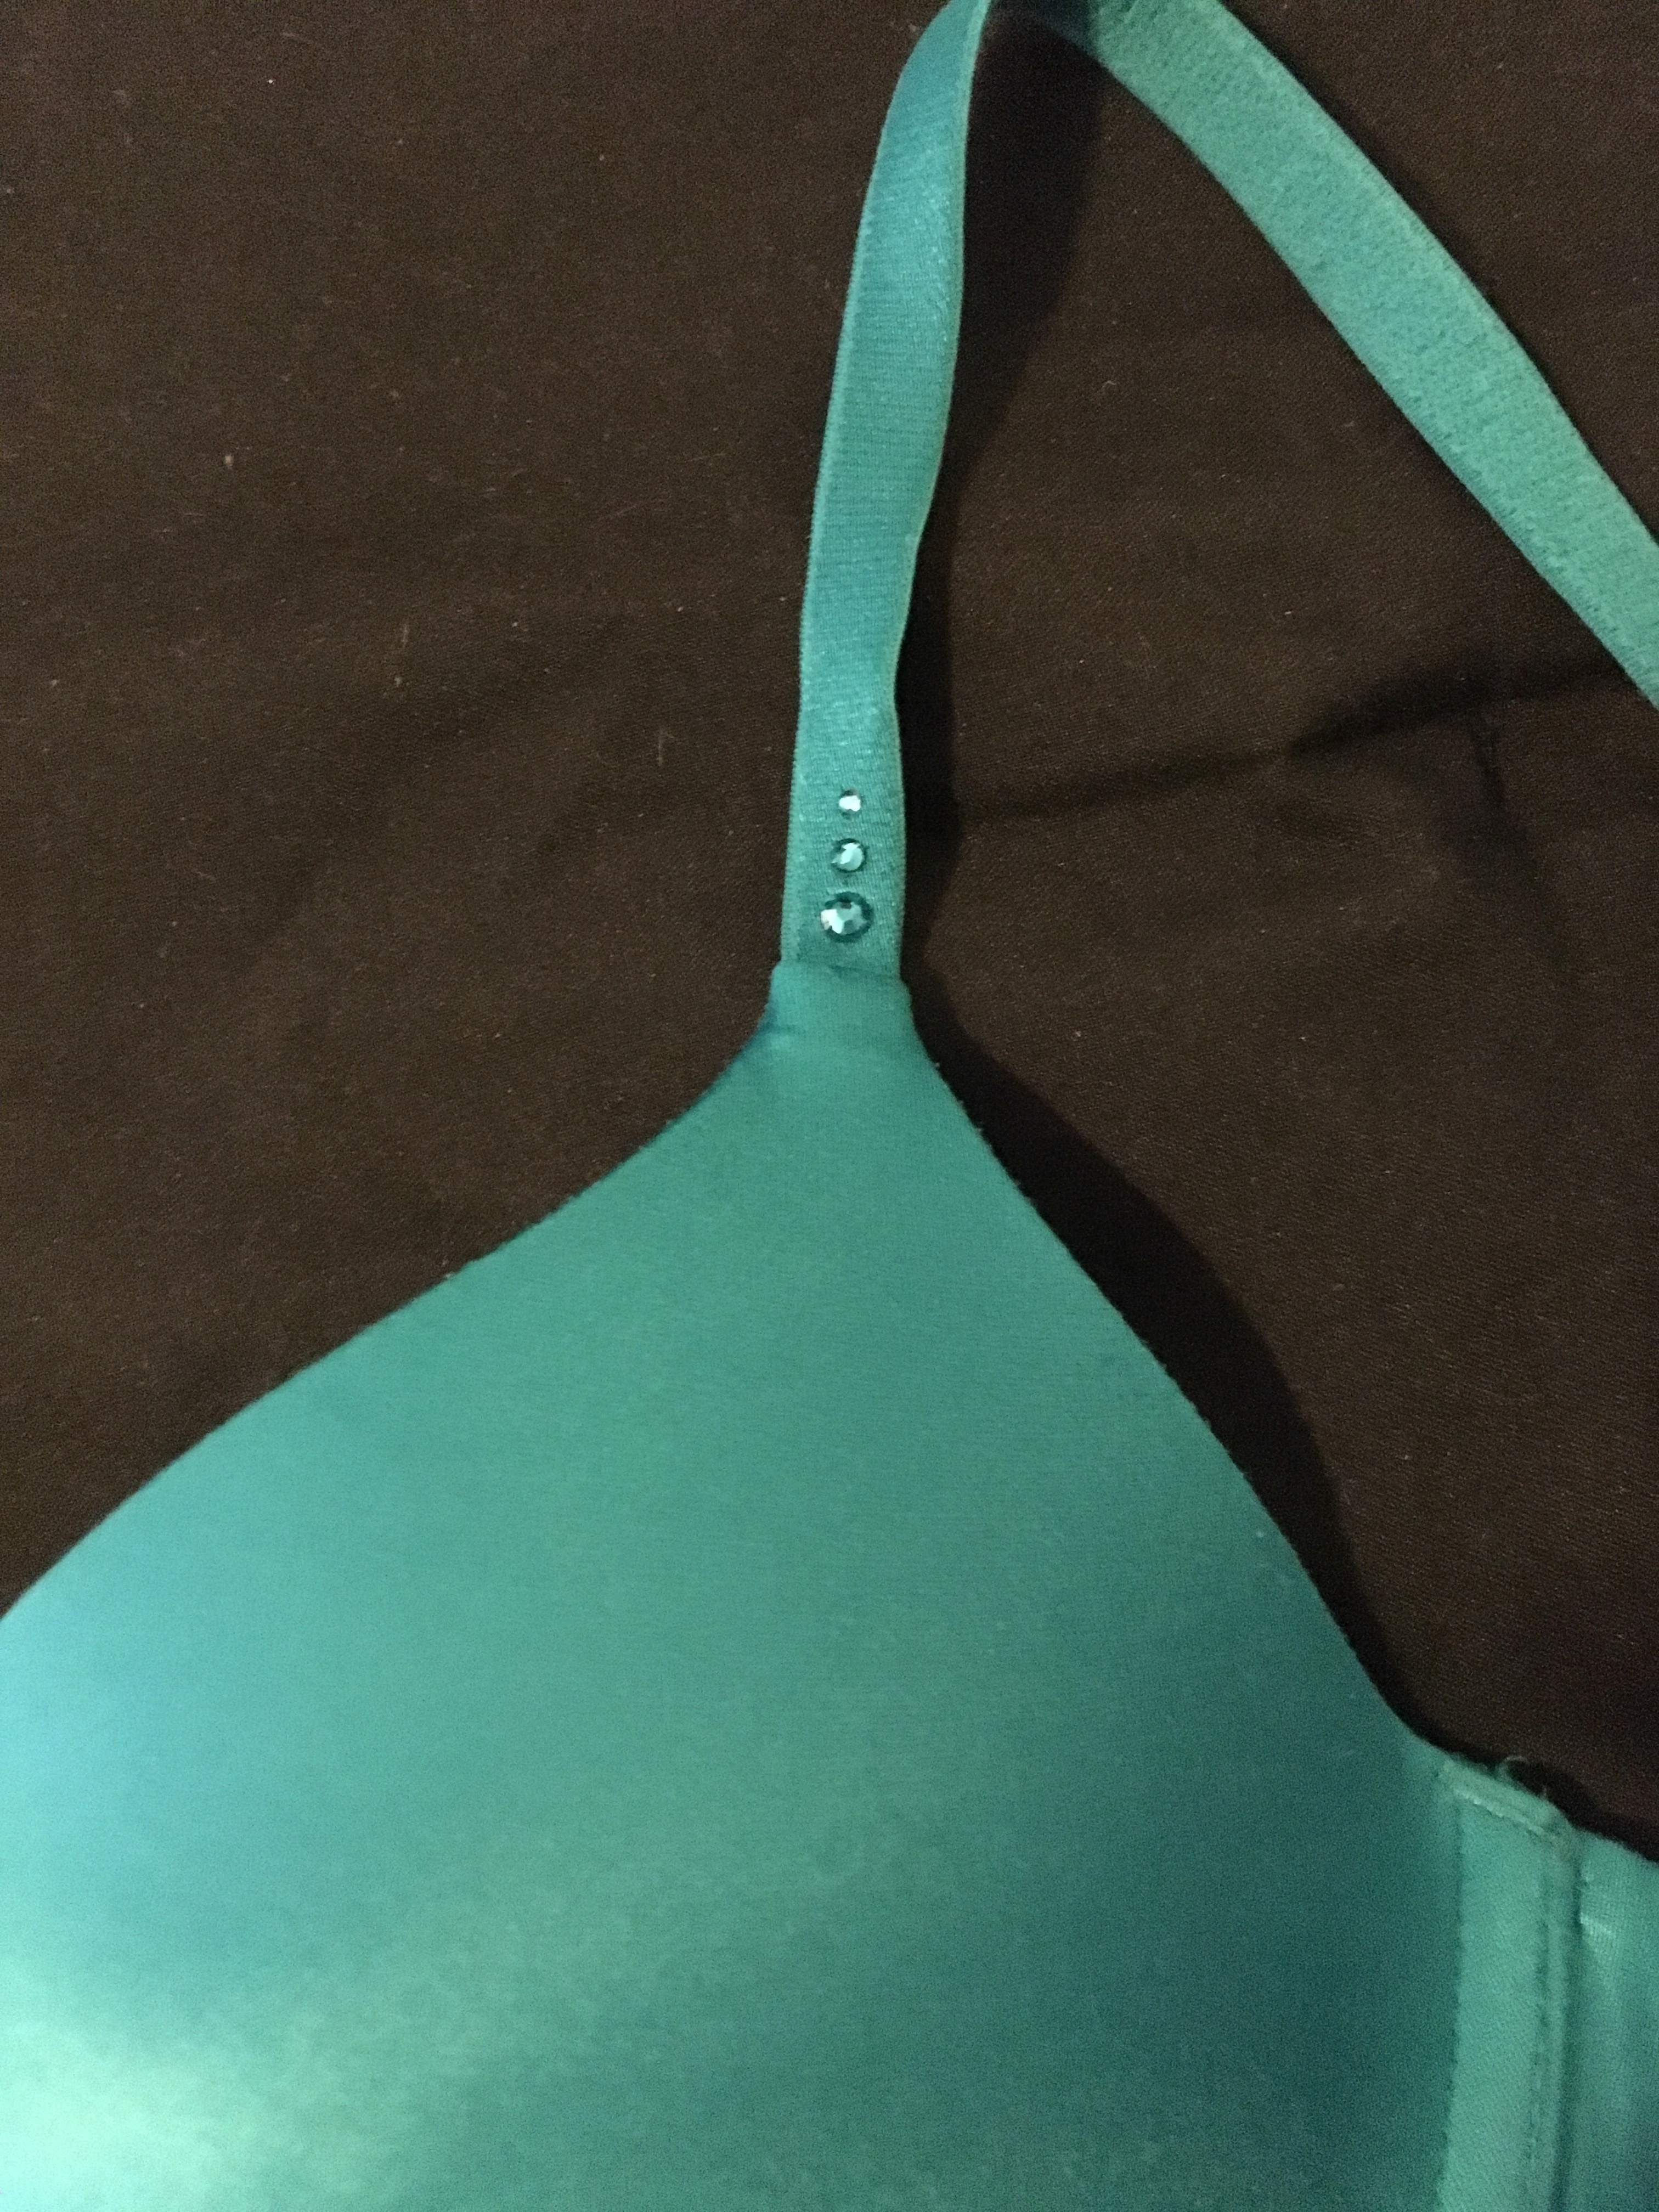 Victoria's Secret Biofit Demi Uplift 34B Available for Free Online Swapping  :: Rehash